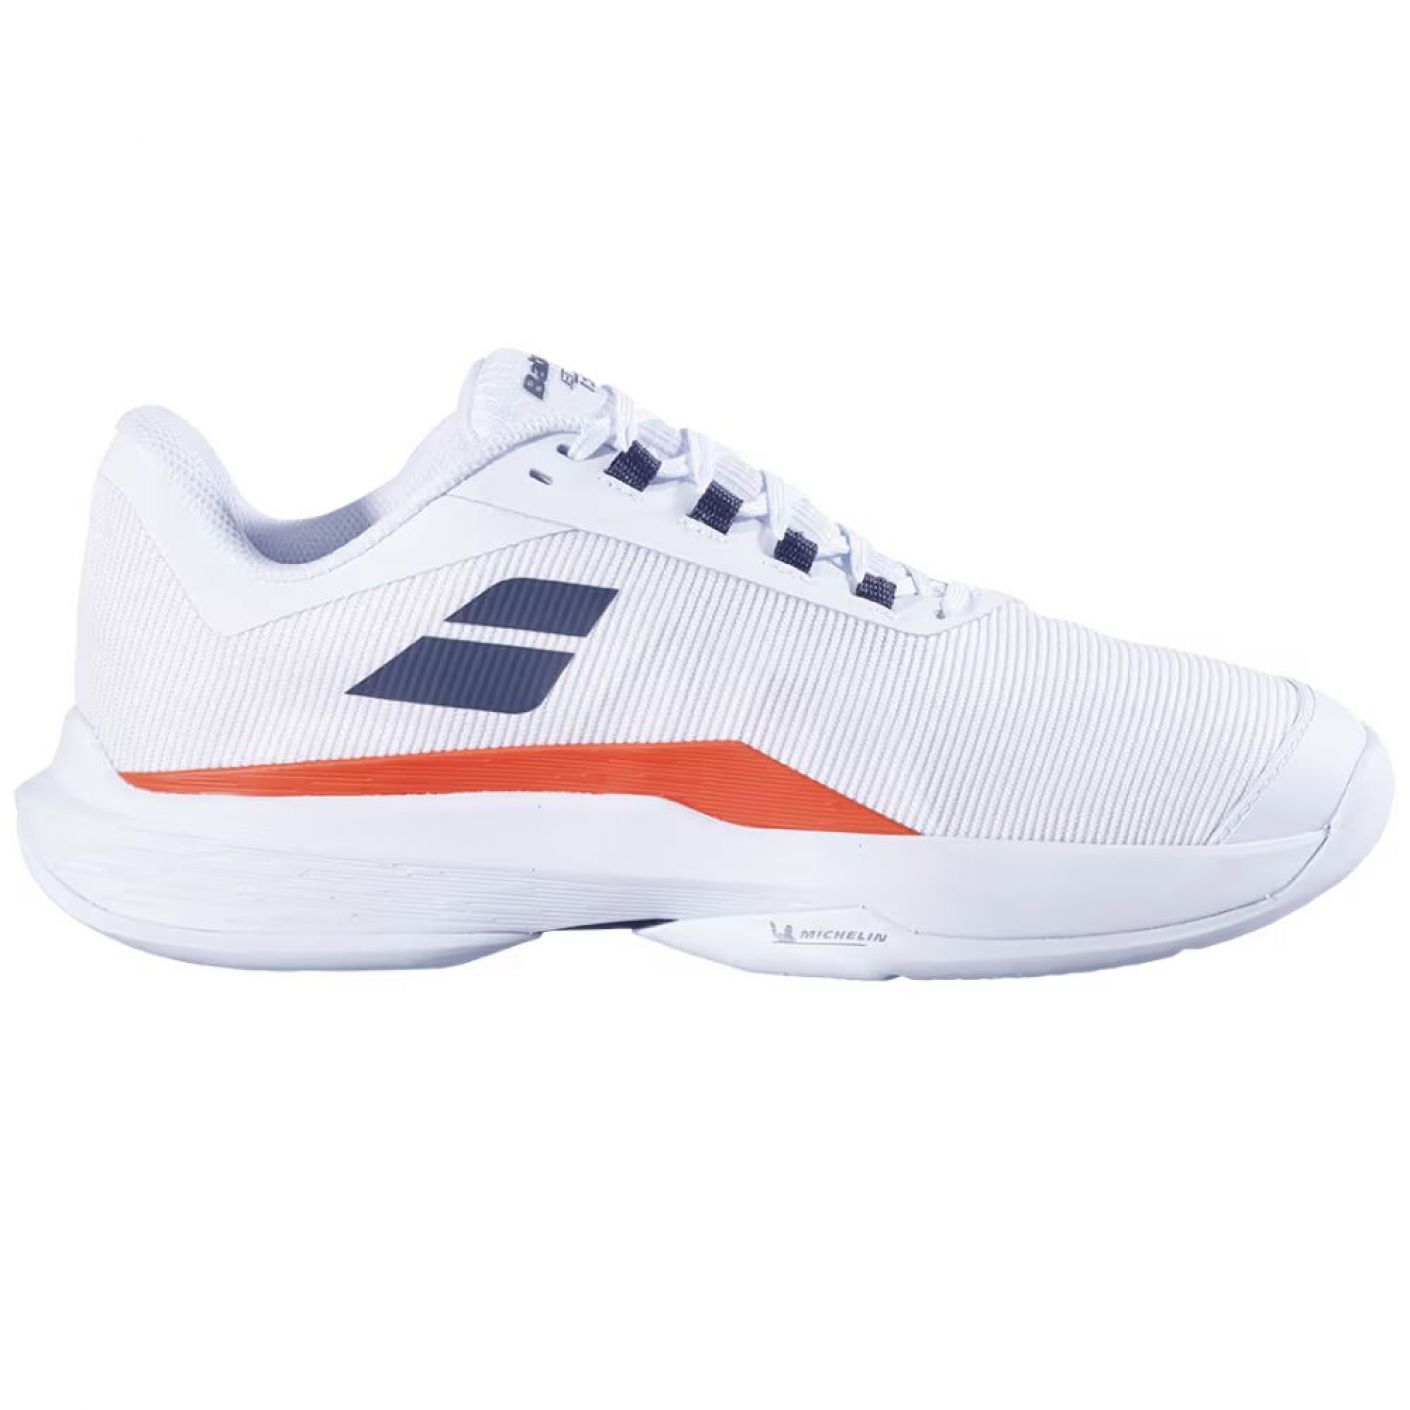 Babolat - Jet tere 2 all court #1089 30S24649